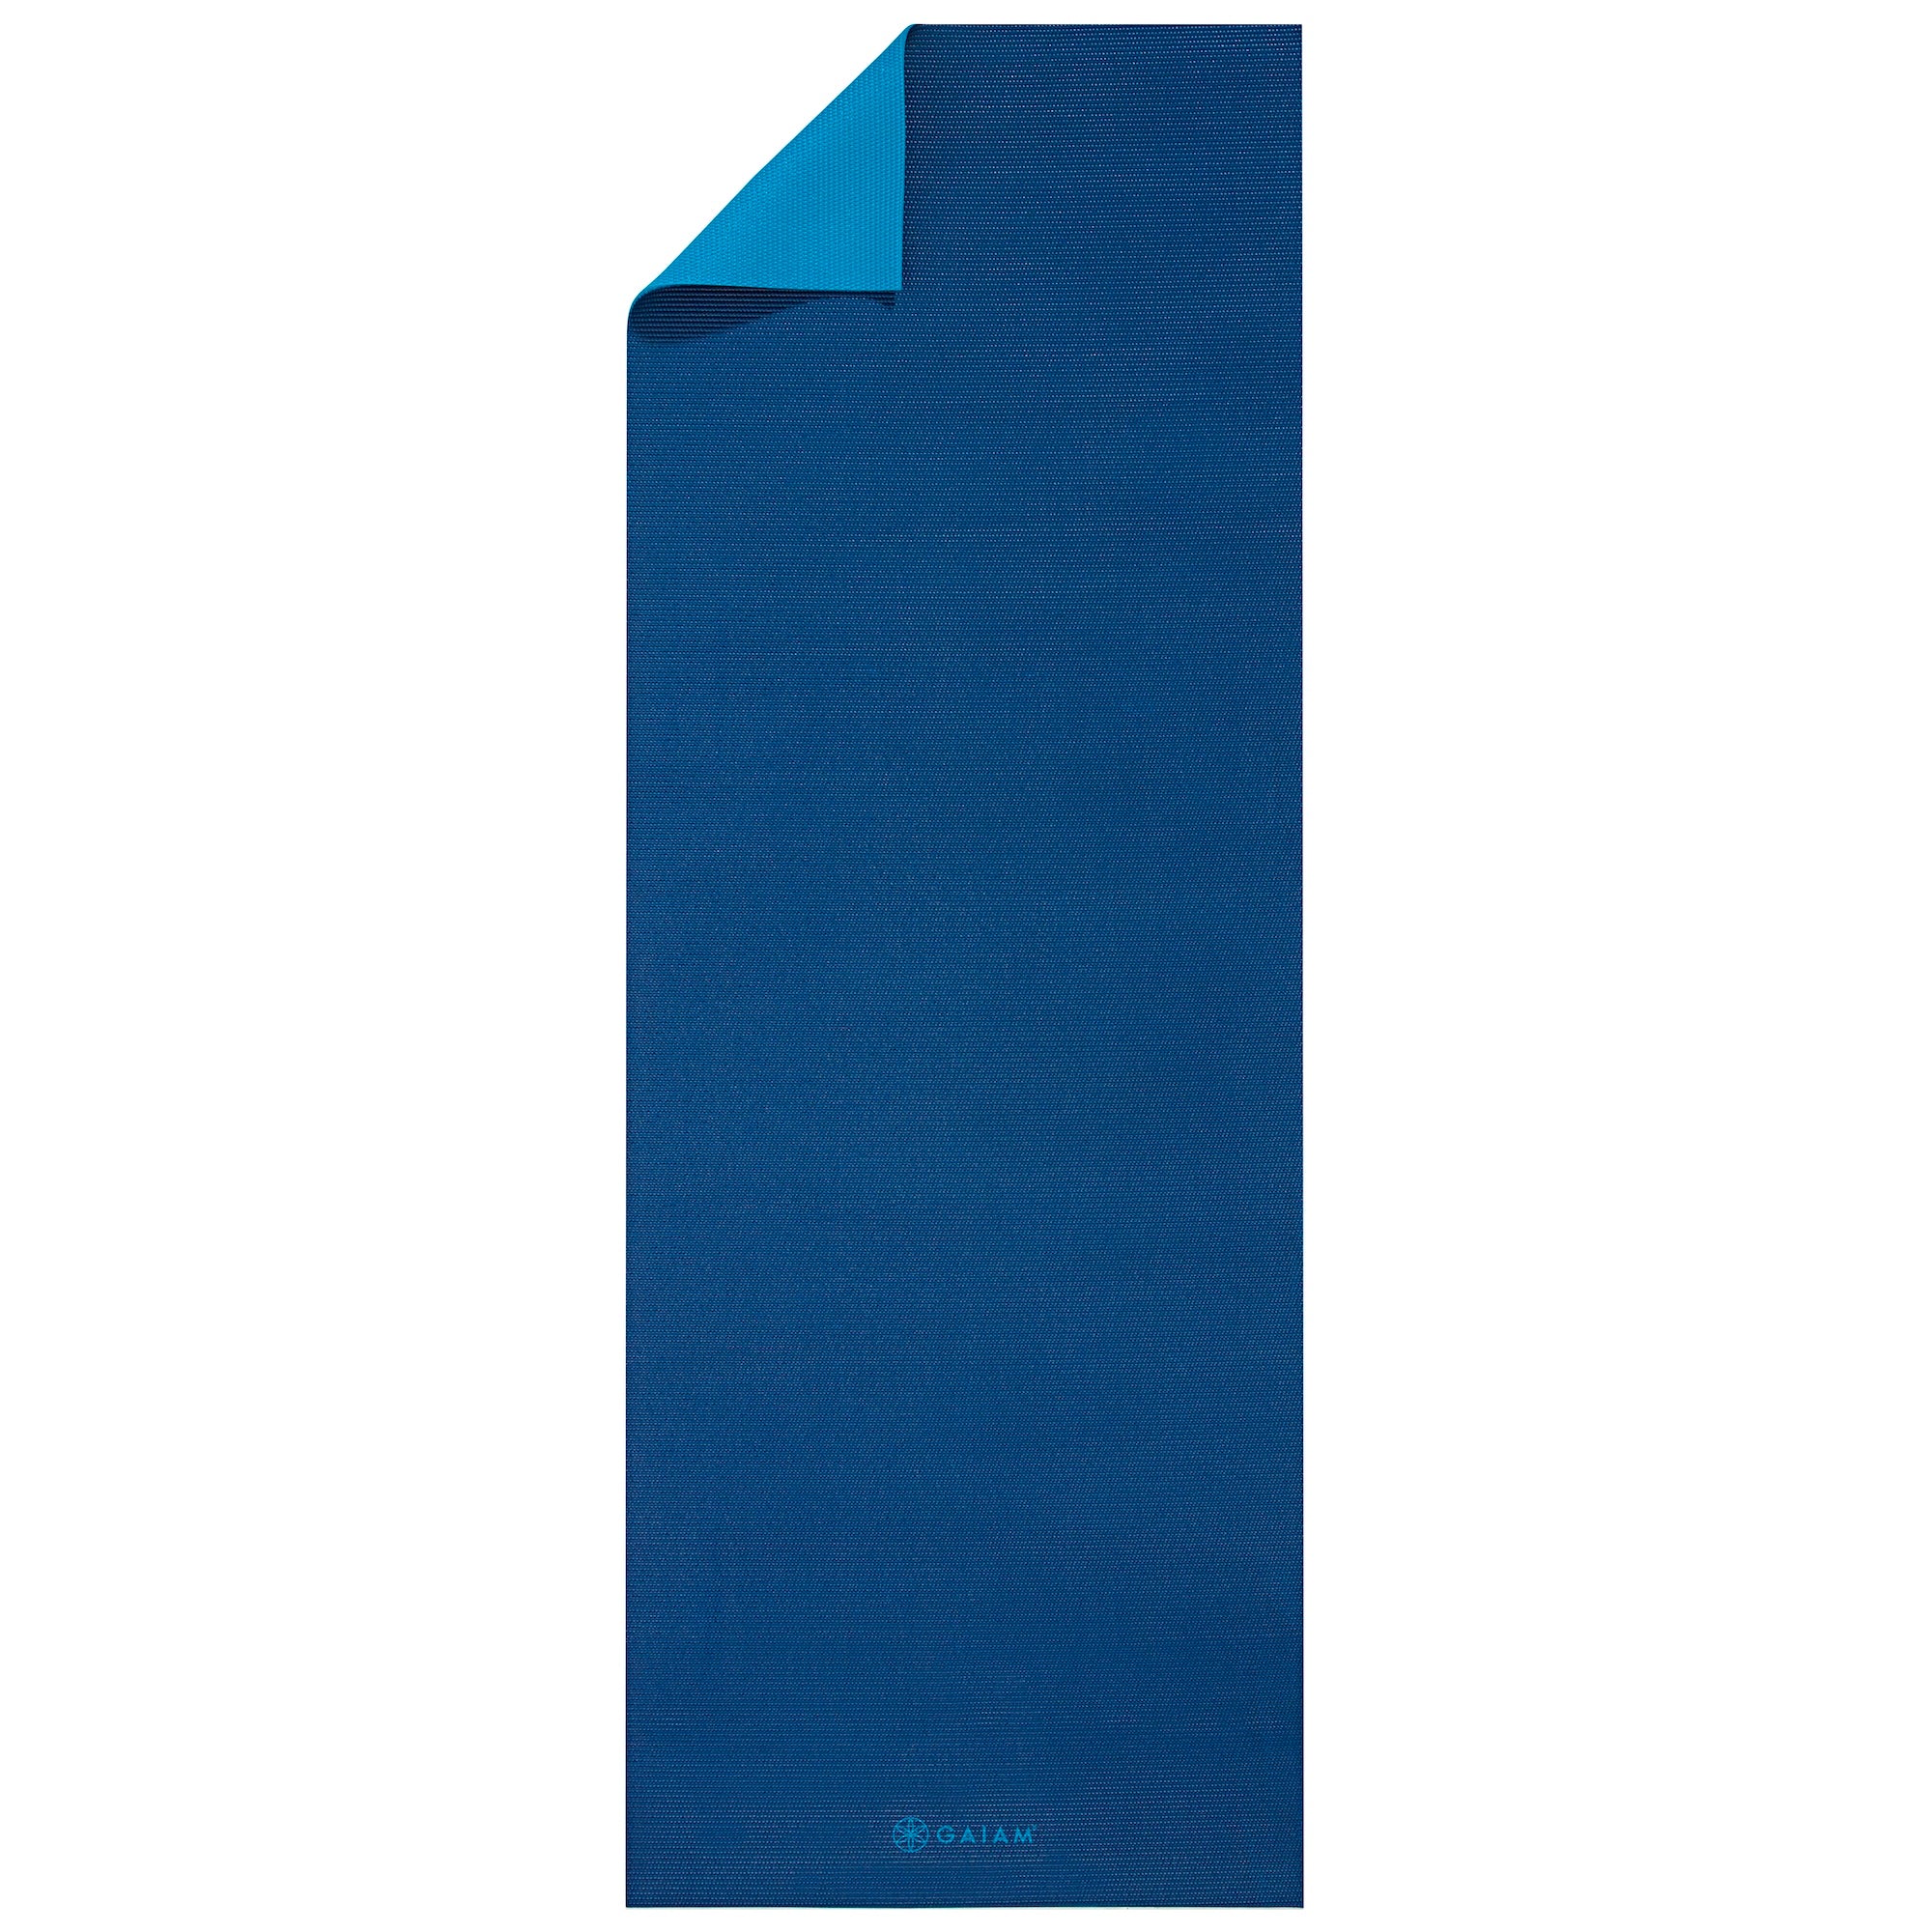 Halfmoon Deluxe Studio 6mm Yoga Mat: Latex Free Moderate Grip Lightweight  and Durable - for Yoga, Pilates, Workout and Floor Exercises 72